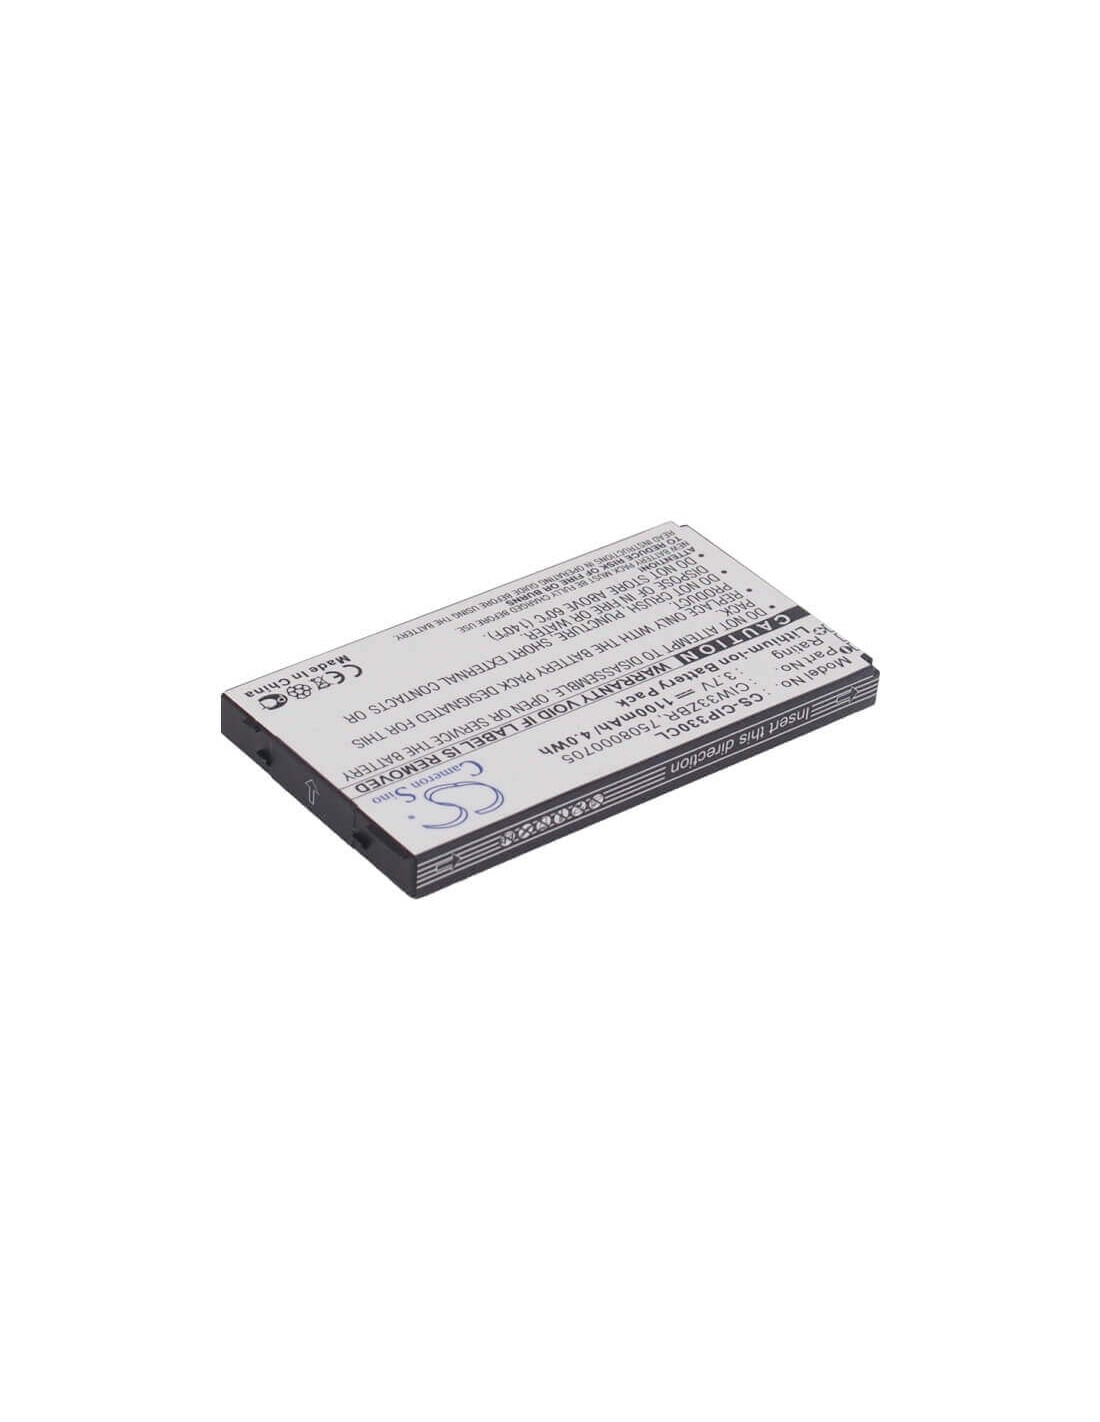 Battery for Cisco, Linksys Wip330, Wip330 3.7V, 1100mAh - 4.07Wh